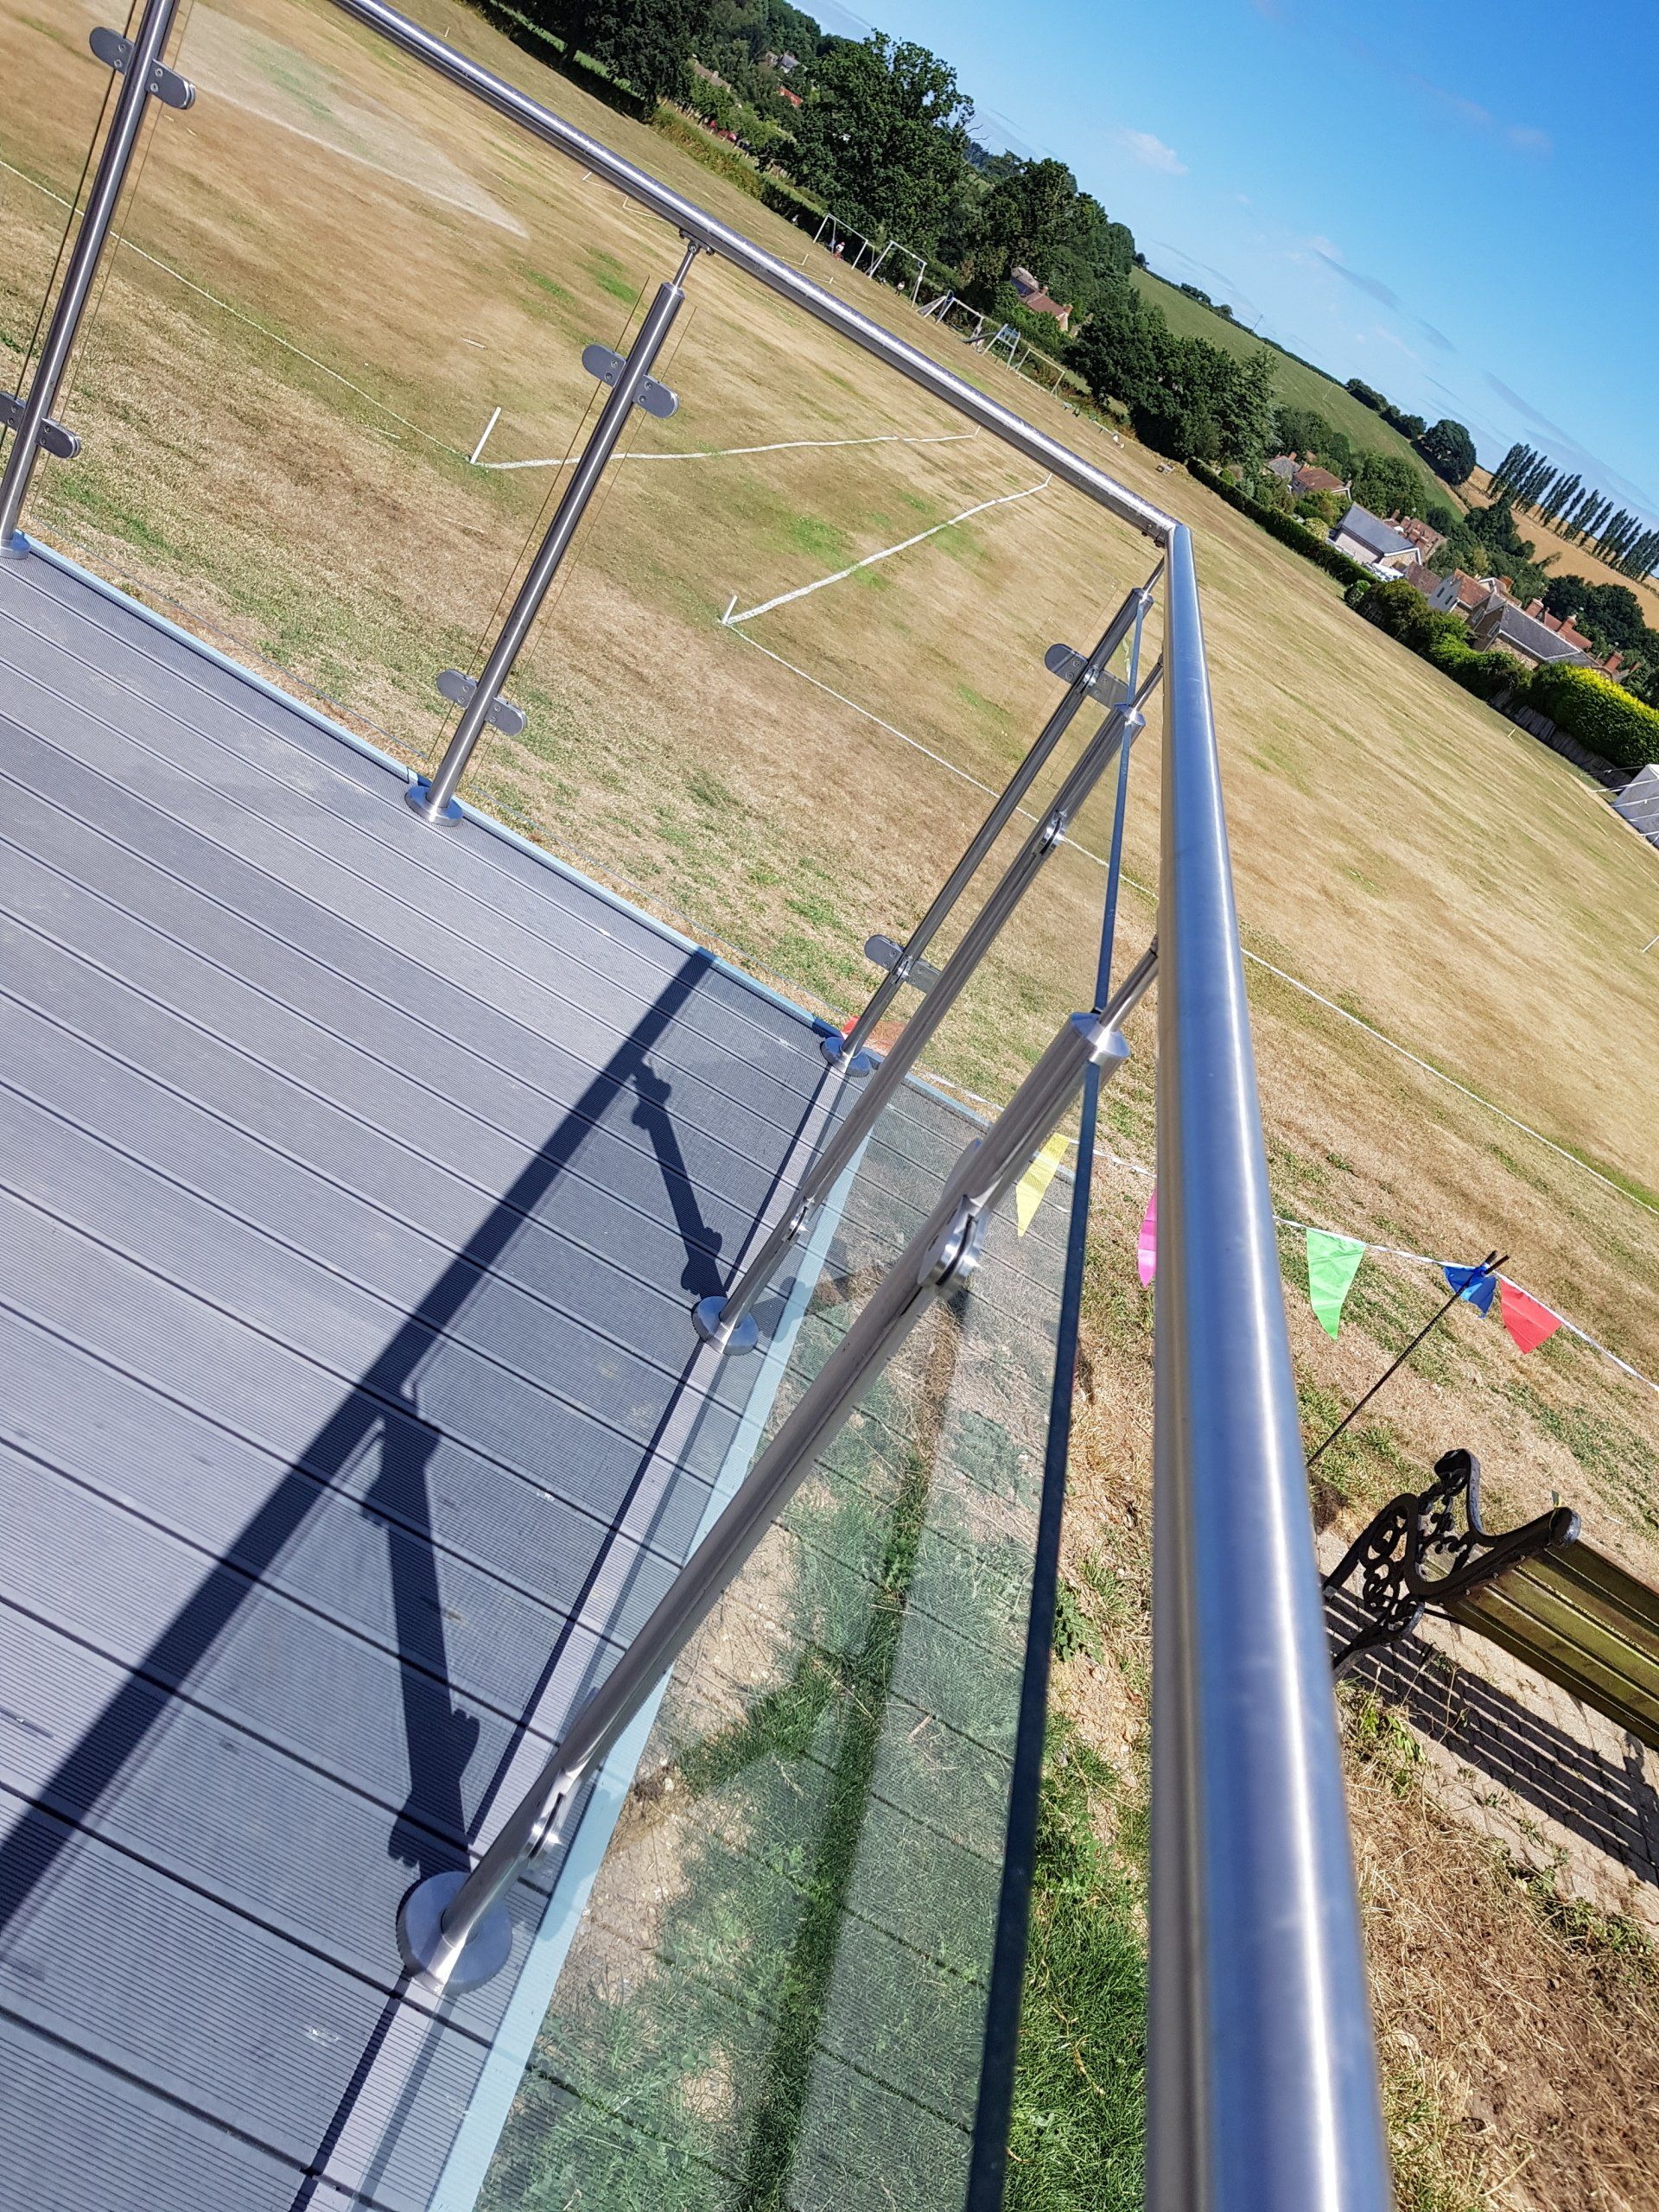 Stainless Steel and glass balustrade